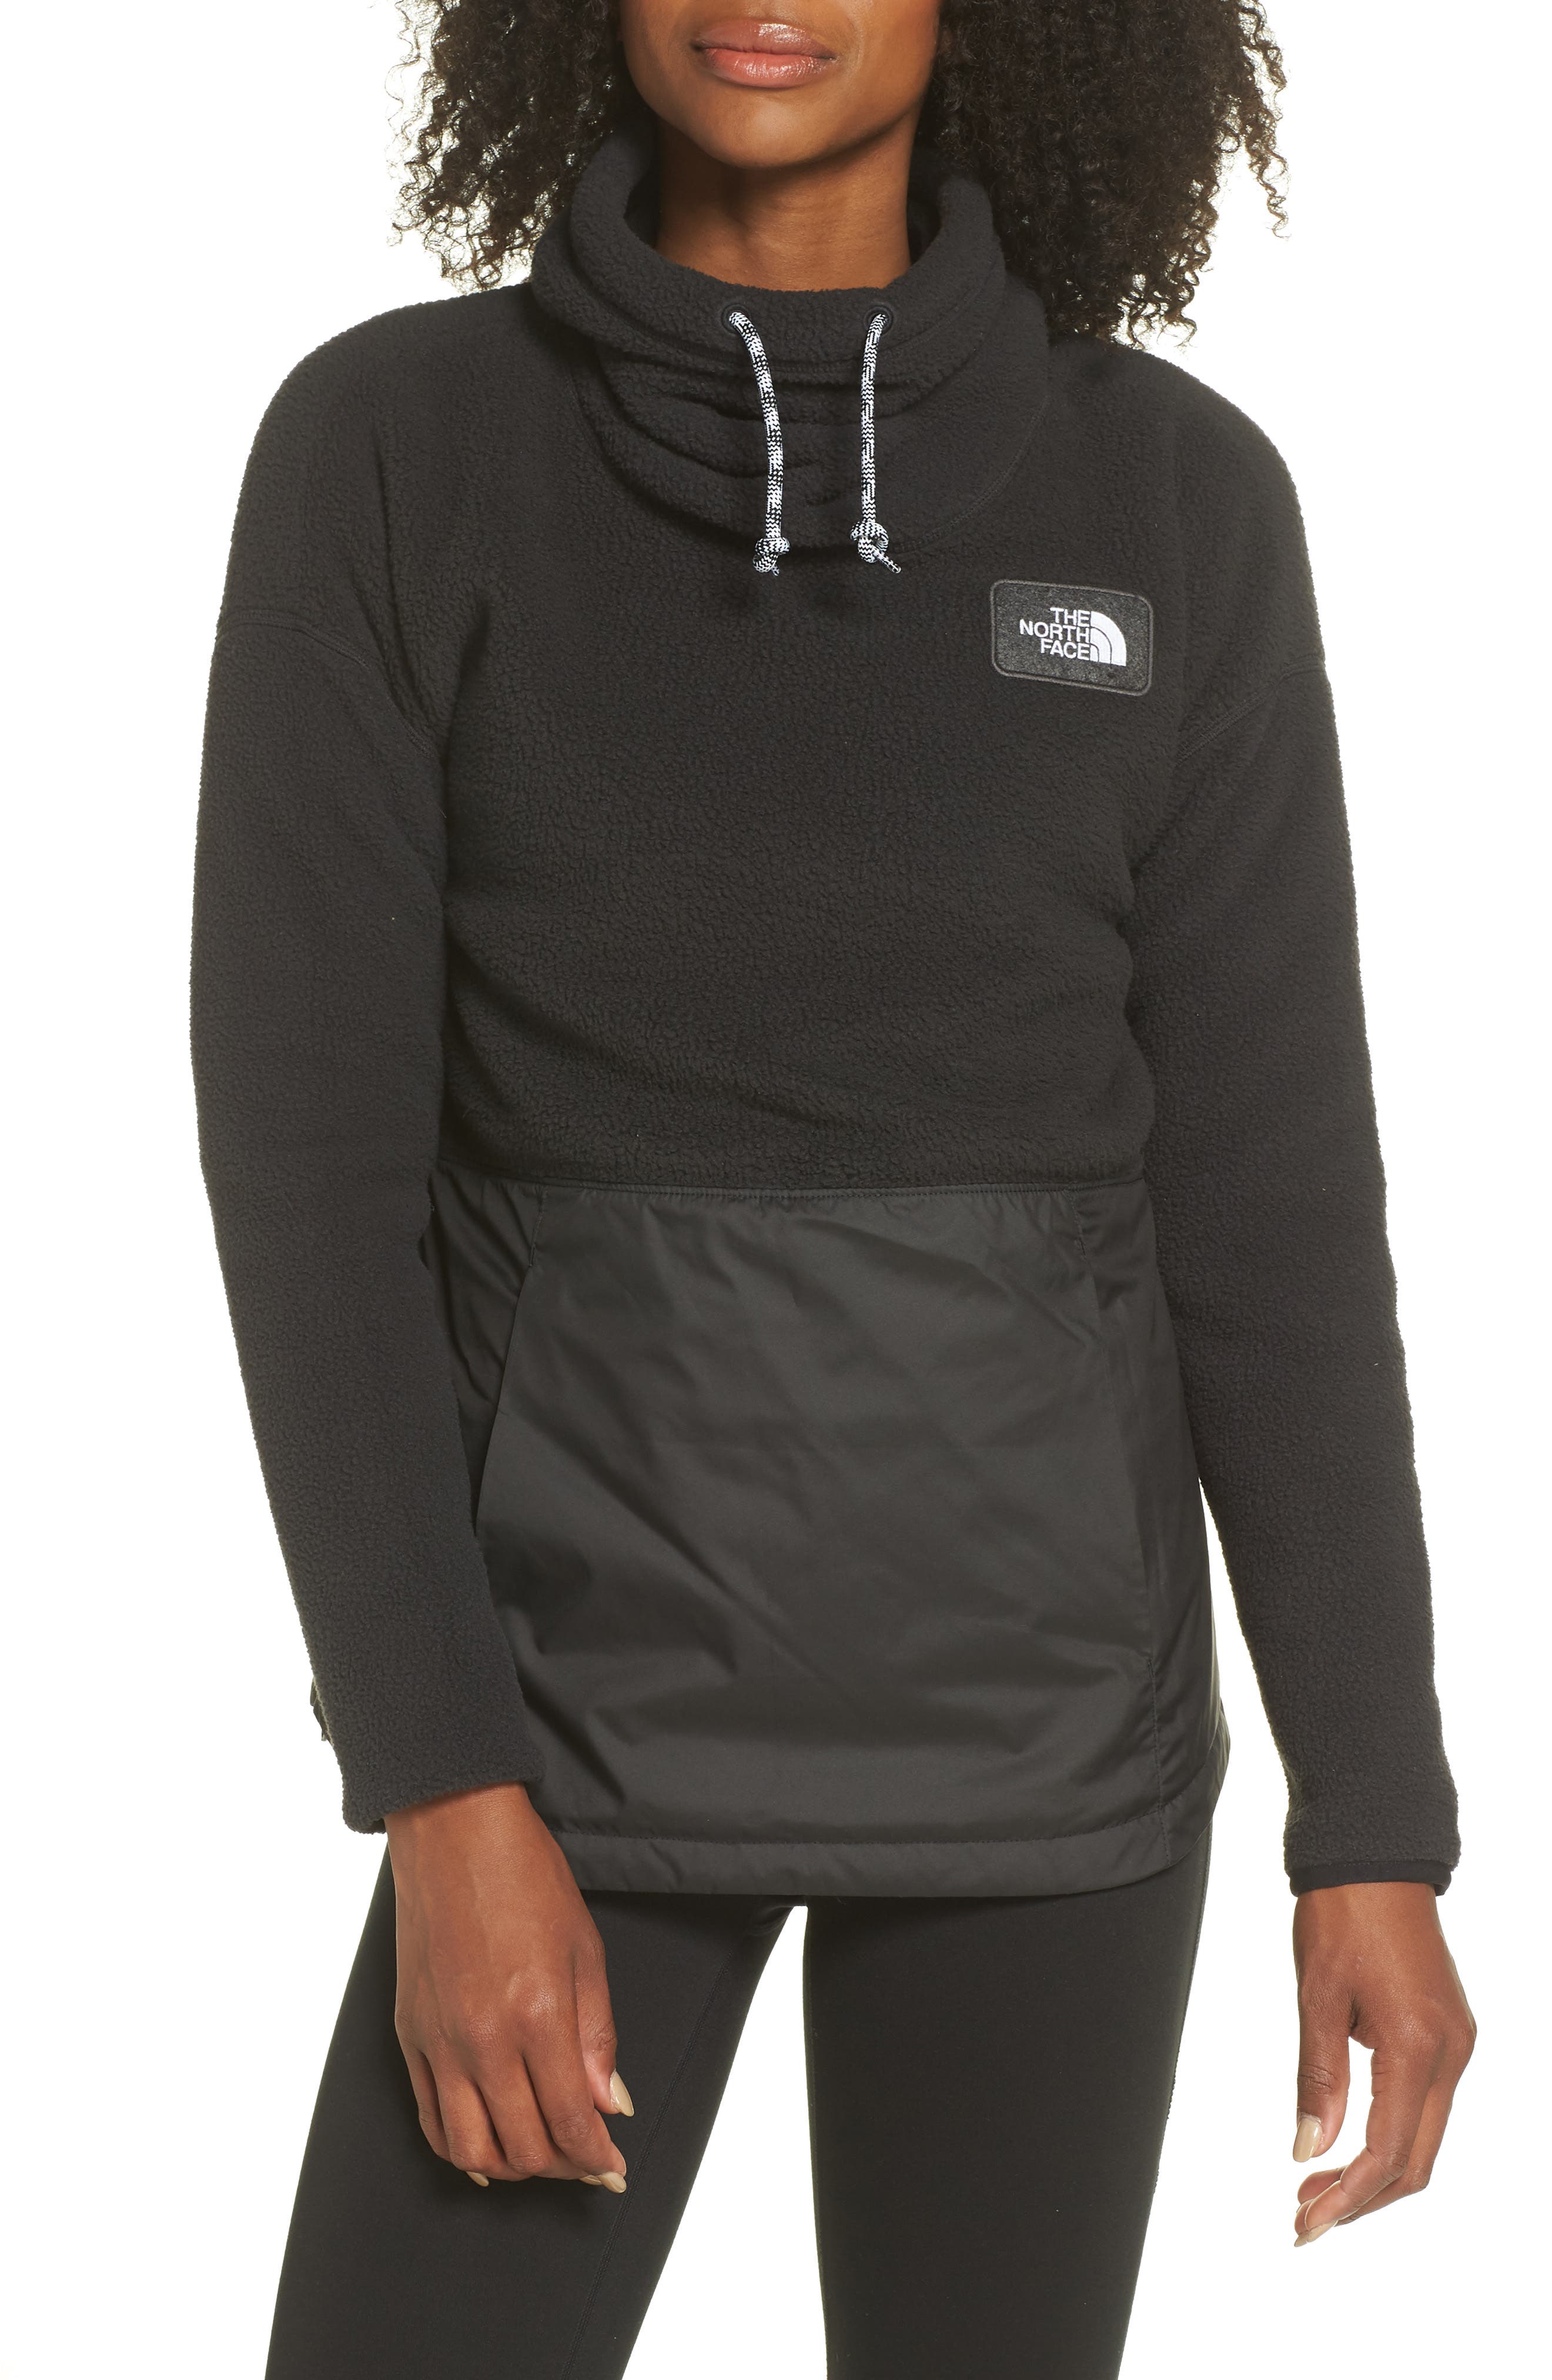 women's riit pullover north face